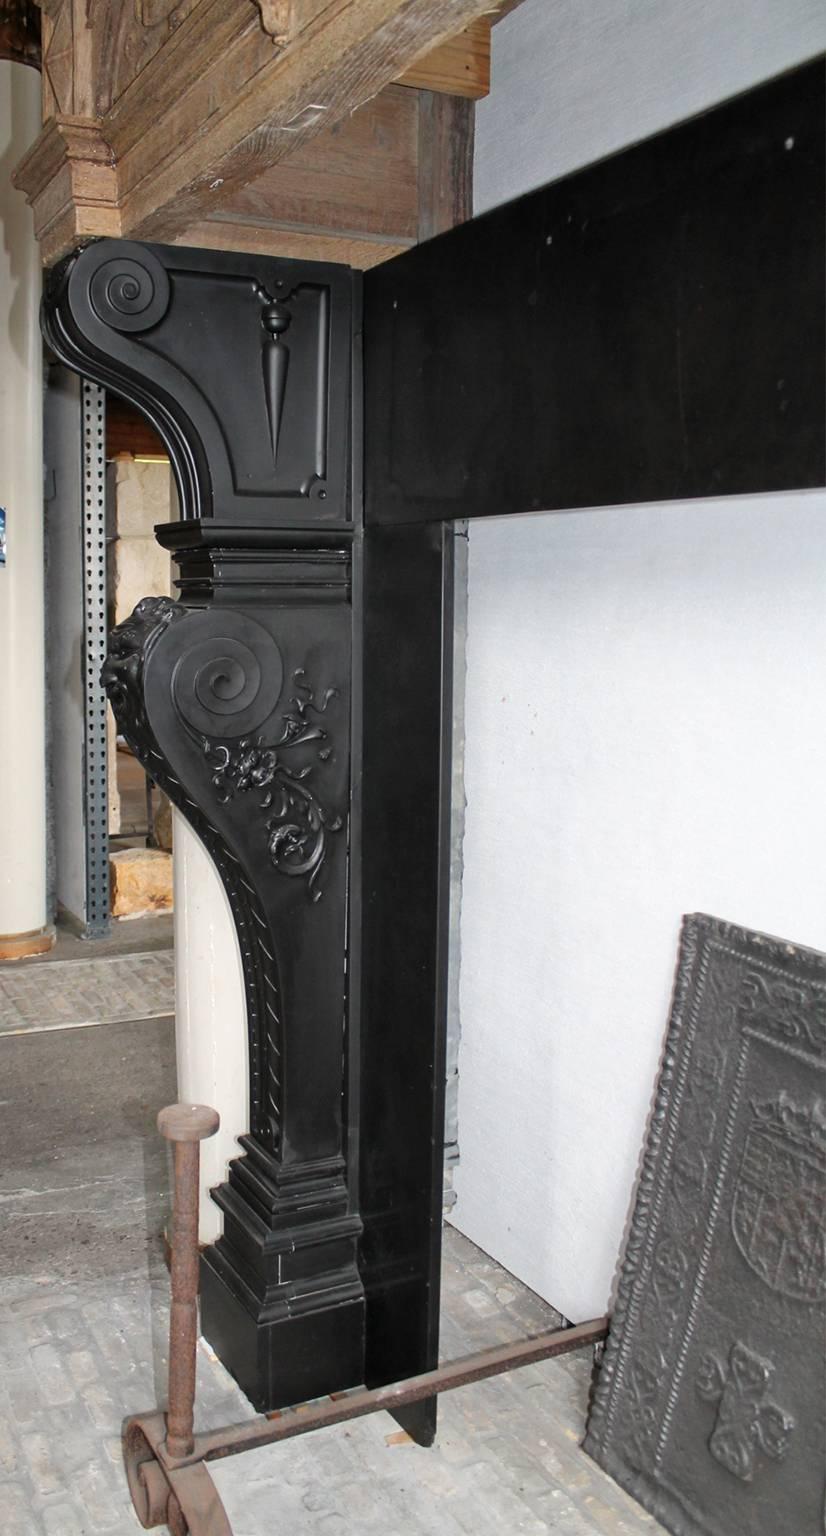 Blackened Antique Marble Fireplace with a Wooden Mantel on Top